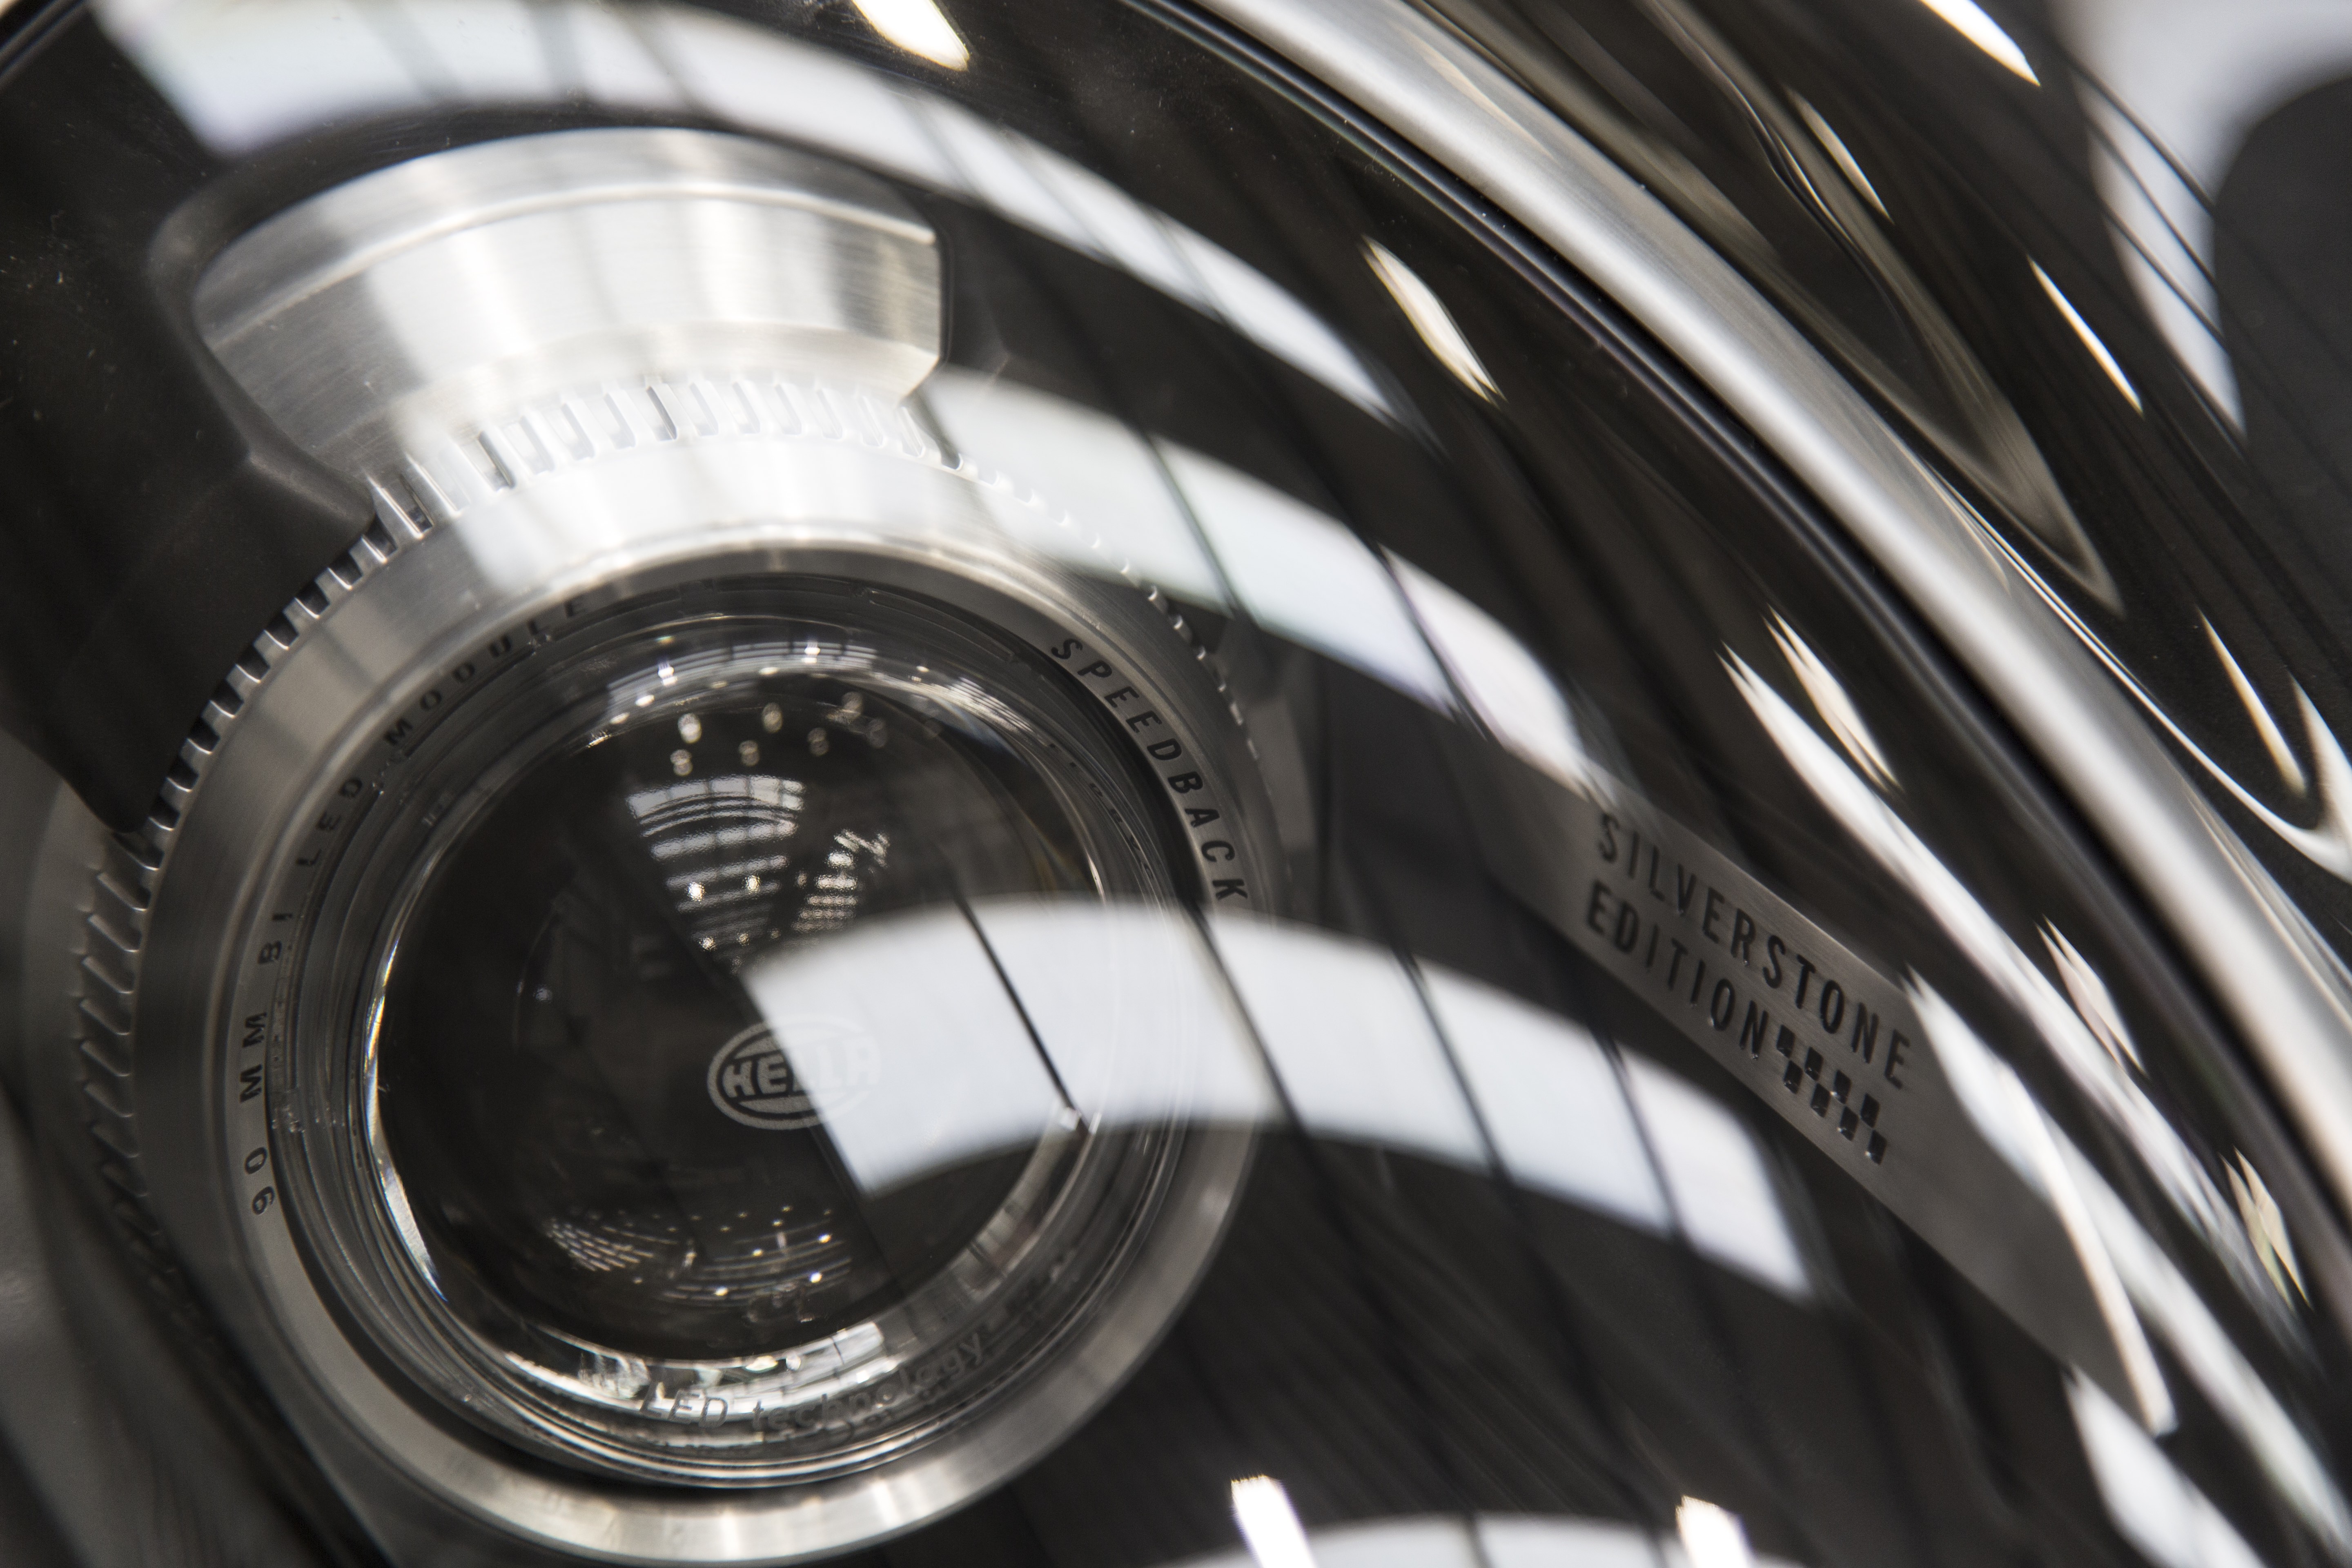 Speedback Silverstone Edition - Technical lens details and unique graphics in the dark ceramic headlamps of Speedback Silverstone Edition